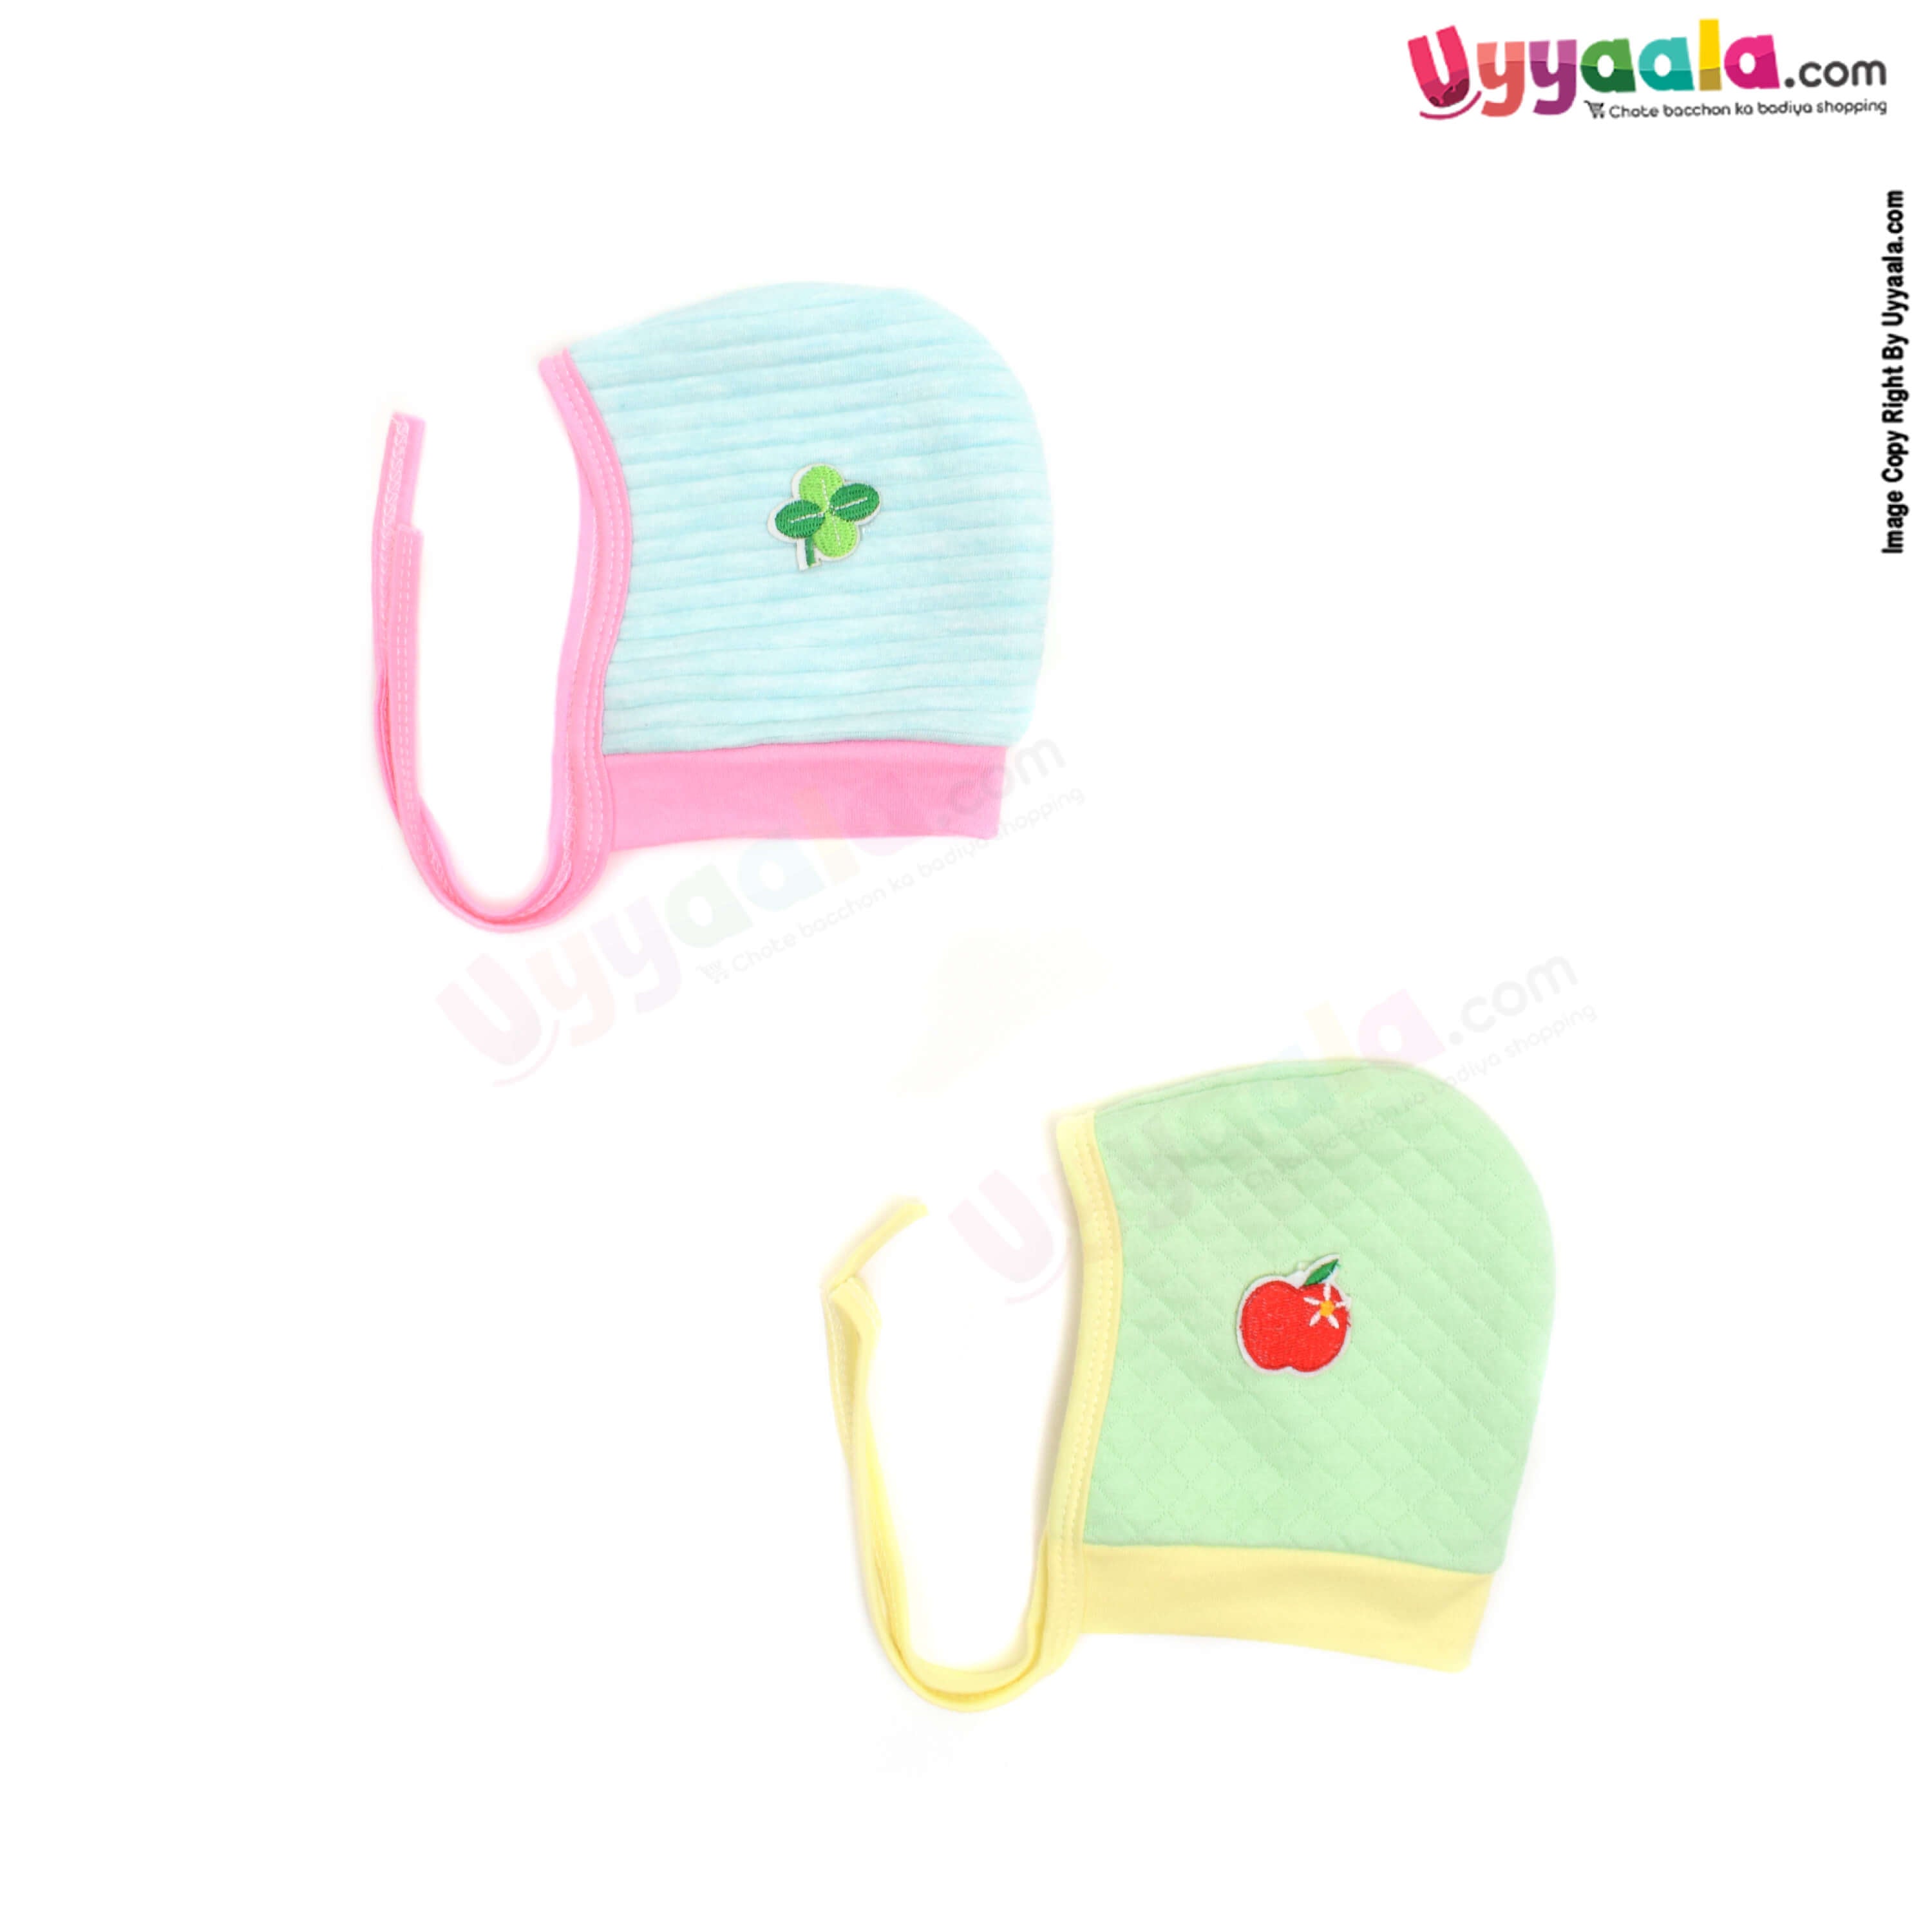 Side Tying Soft Hosiery Cotton Caps for Babies with Apple, Flower Patch Pack of 2, 0-6m age- Light Green & Sky Blue